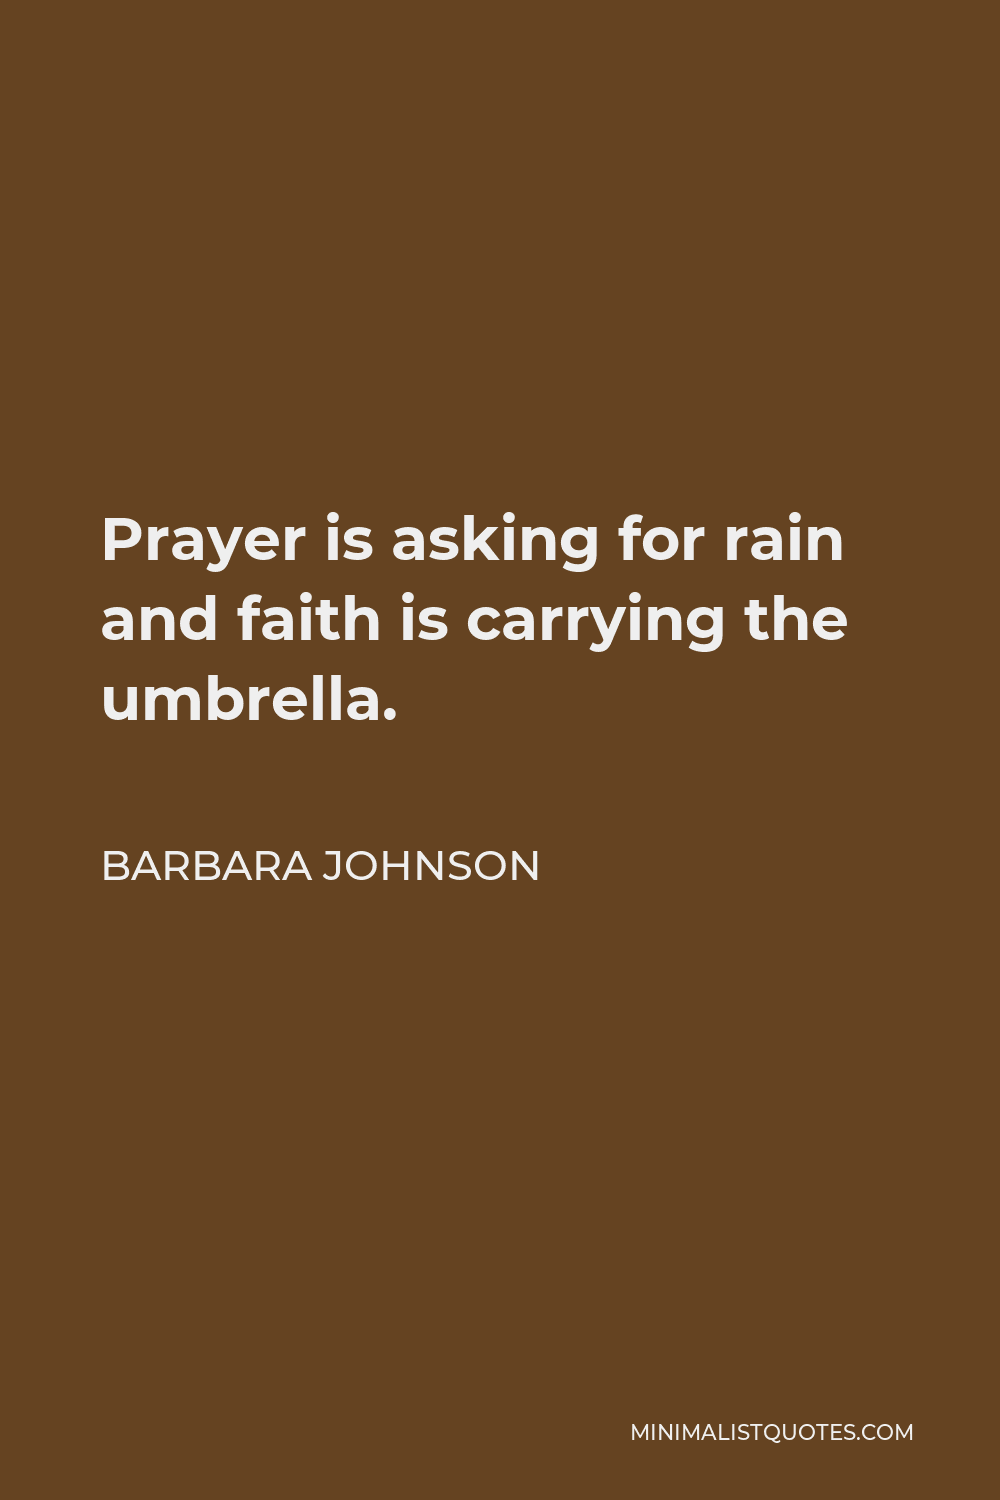 Barbara Johnson Quote - Prayer is asking for rain and faith is carrying the umbrella.